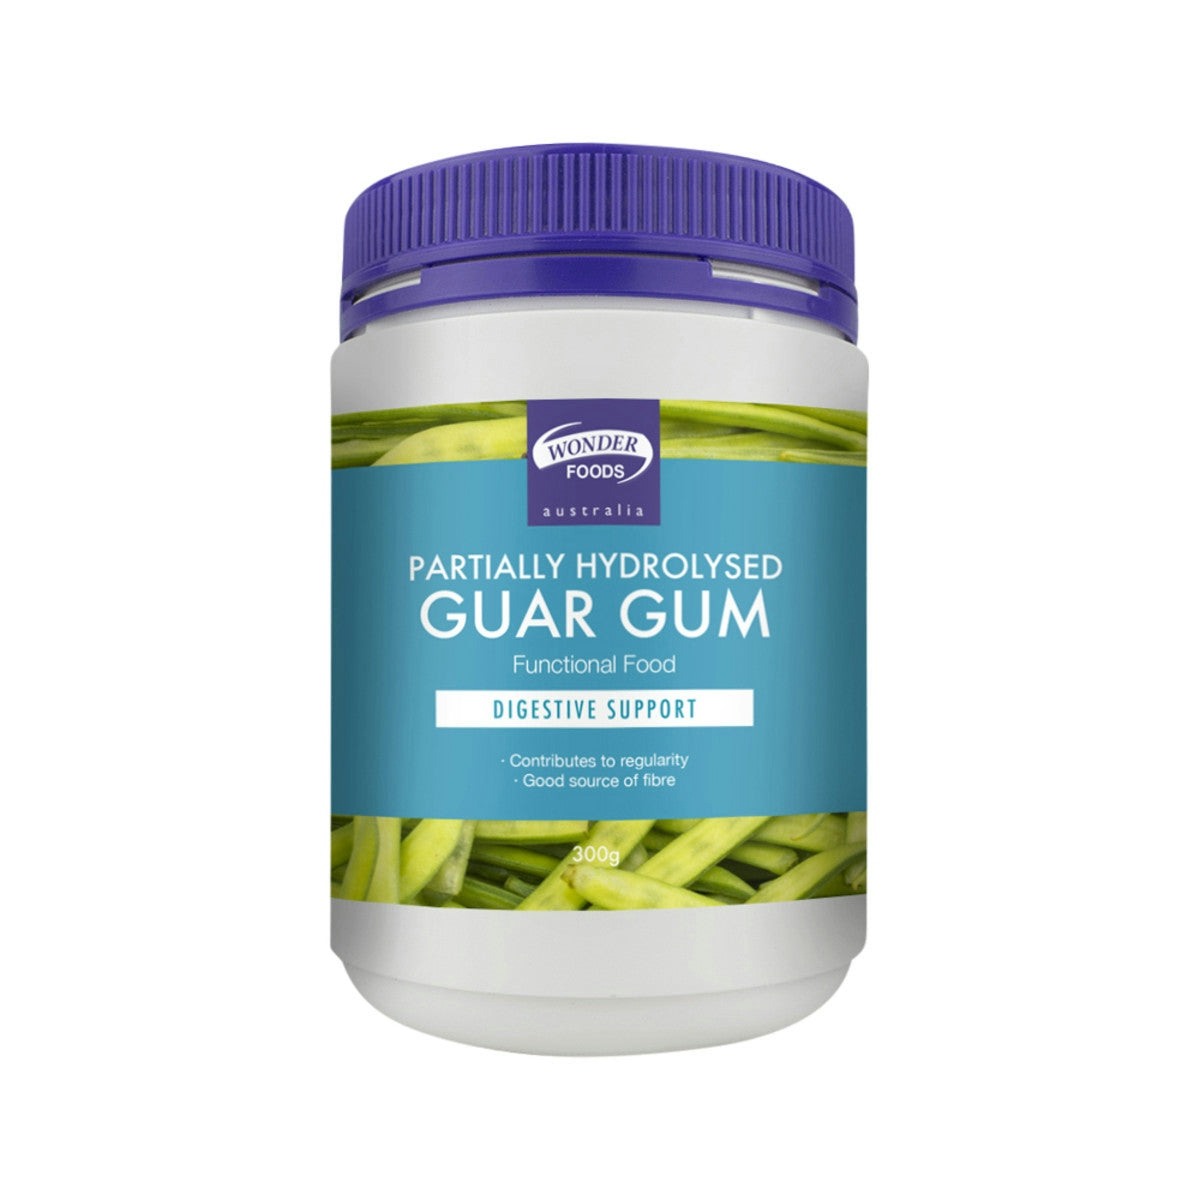 image of Wonder Foods Partially Hydrolysed Guar Gum 300g on white background